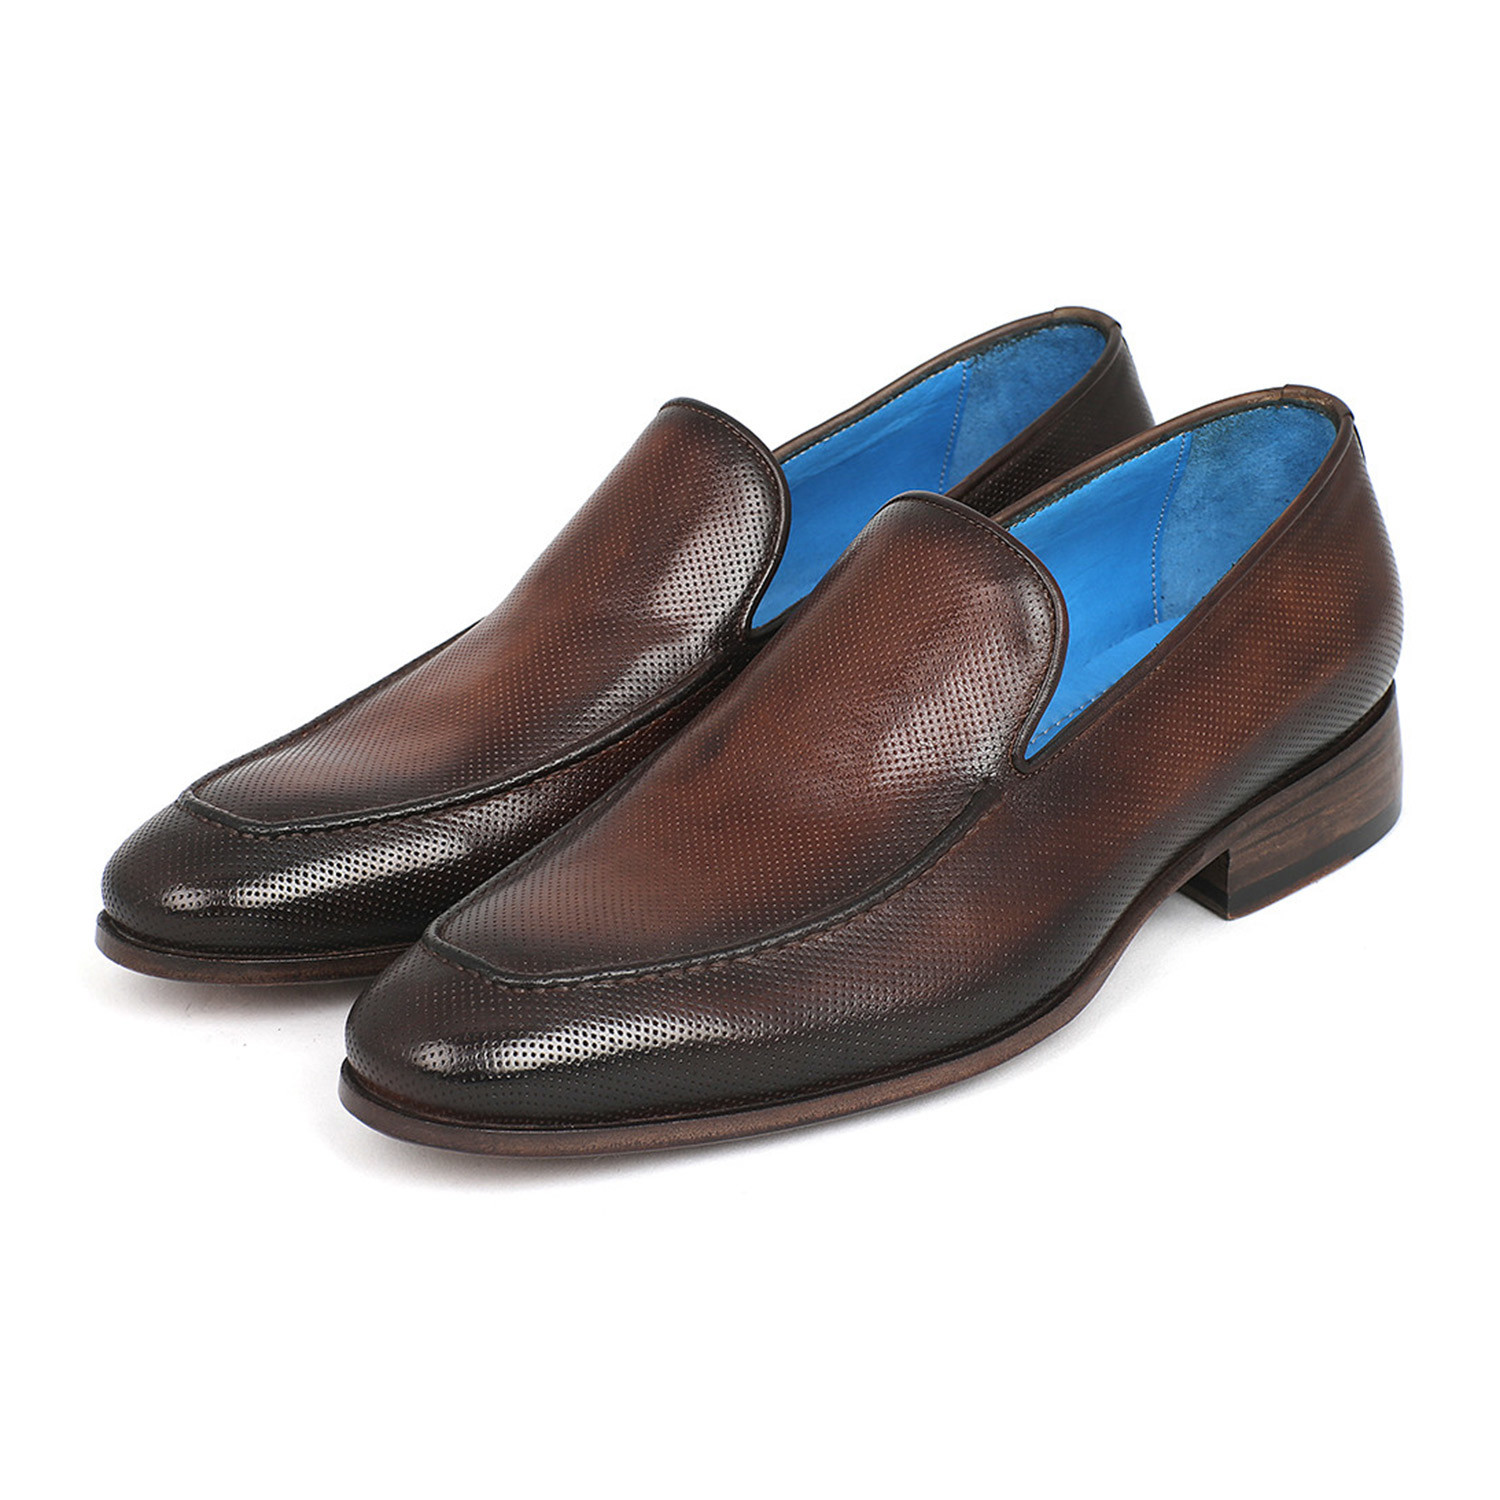 Men's Perforated Leather Loafers // Brown (Euro: 40) - Paul Parkman ...